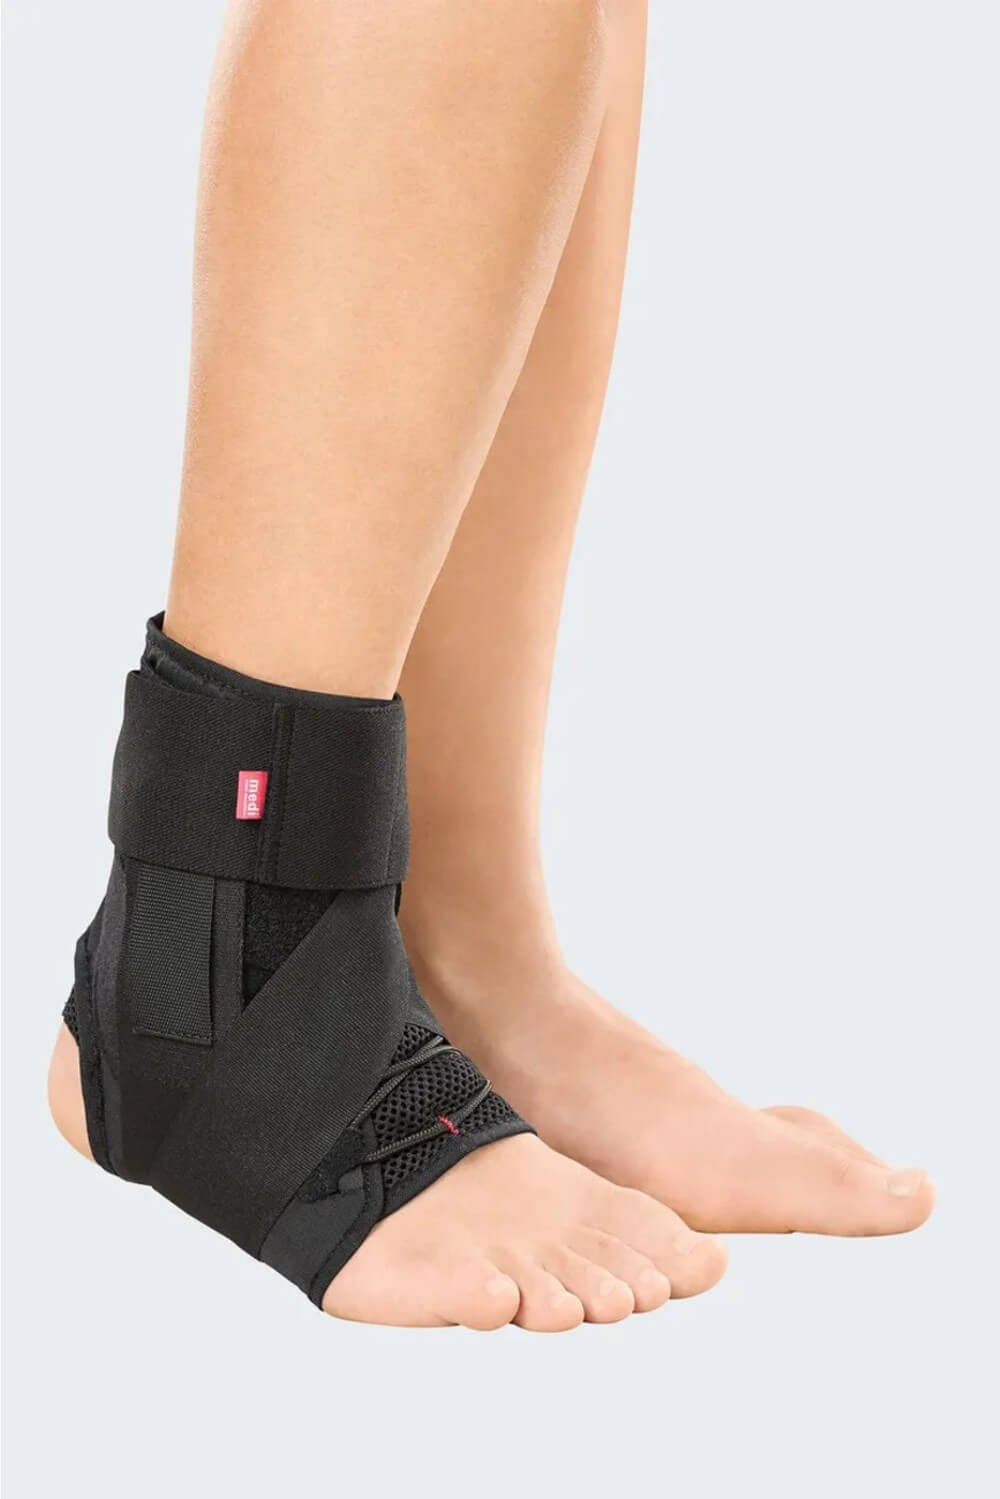 Medi Sports Ankle Brace with Stays (Free Shipping) – BodyHeal